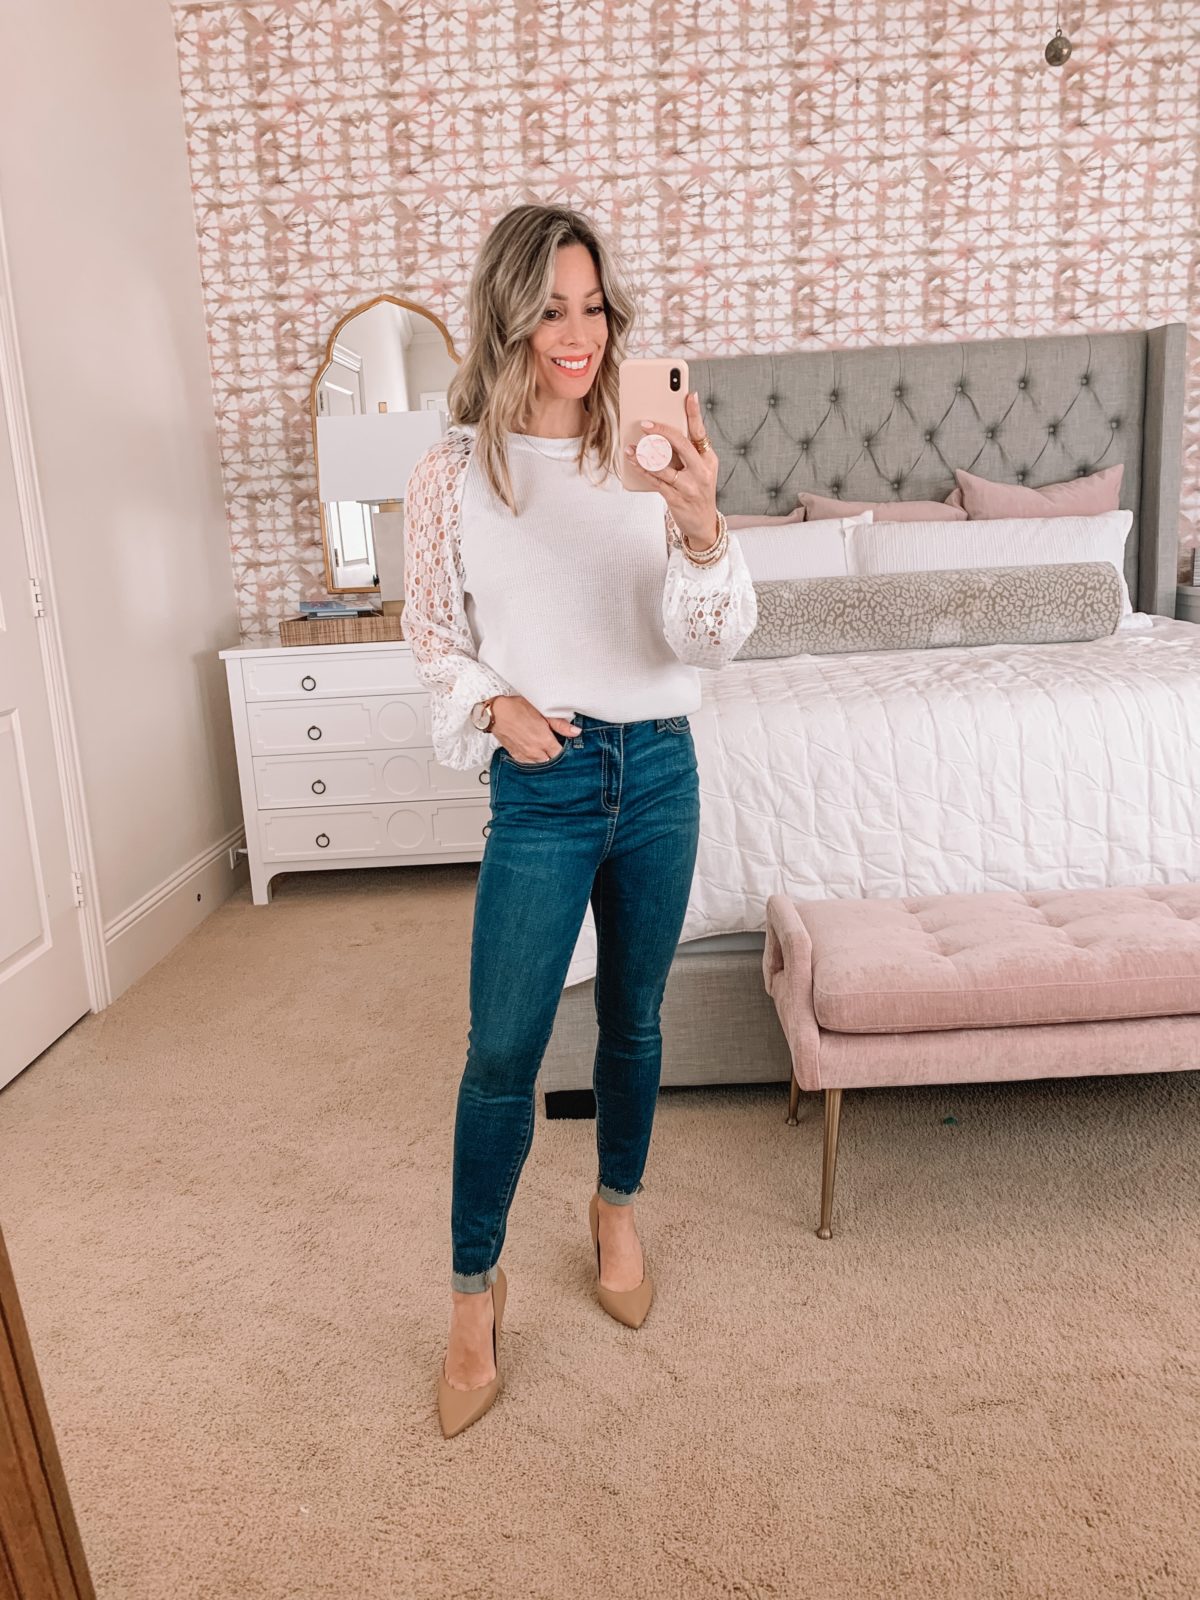 Amazon Fashion Faves, White Lace Sleeved Top, Jeans, Heels 